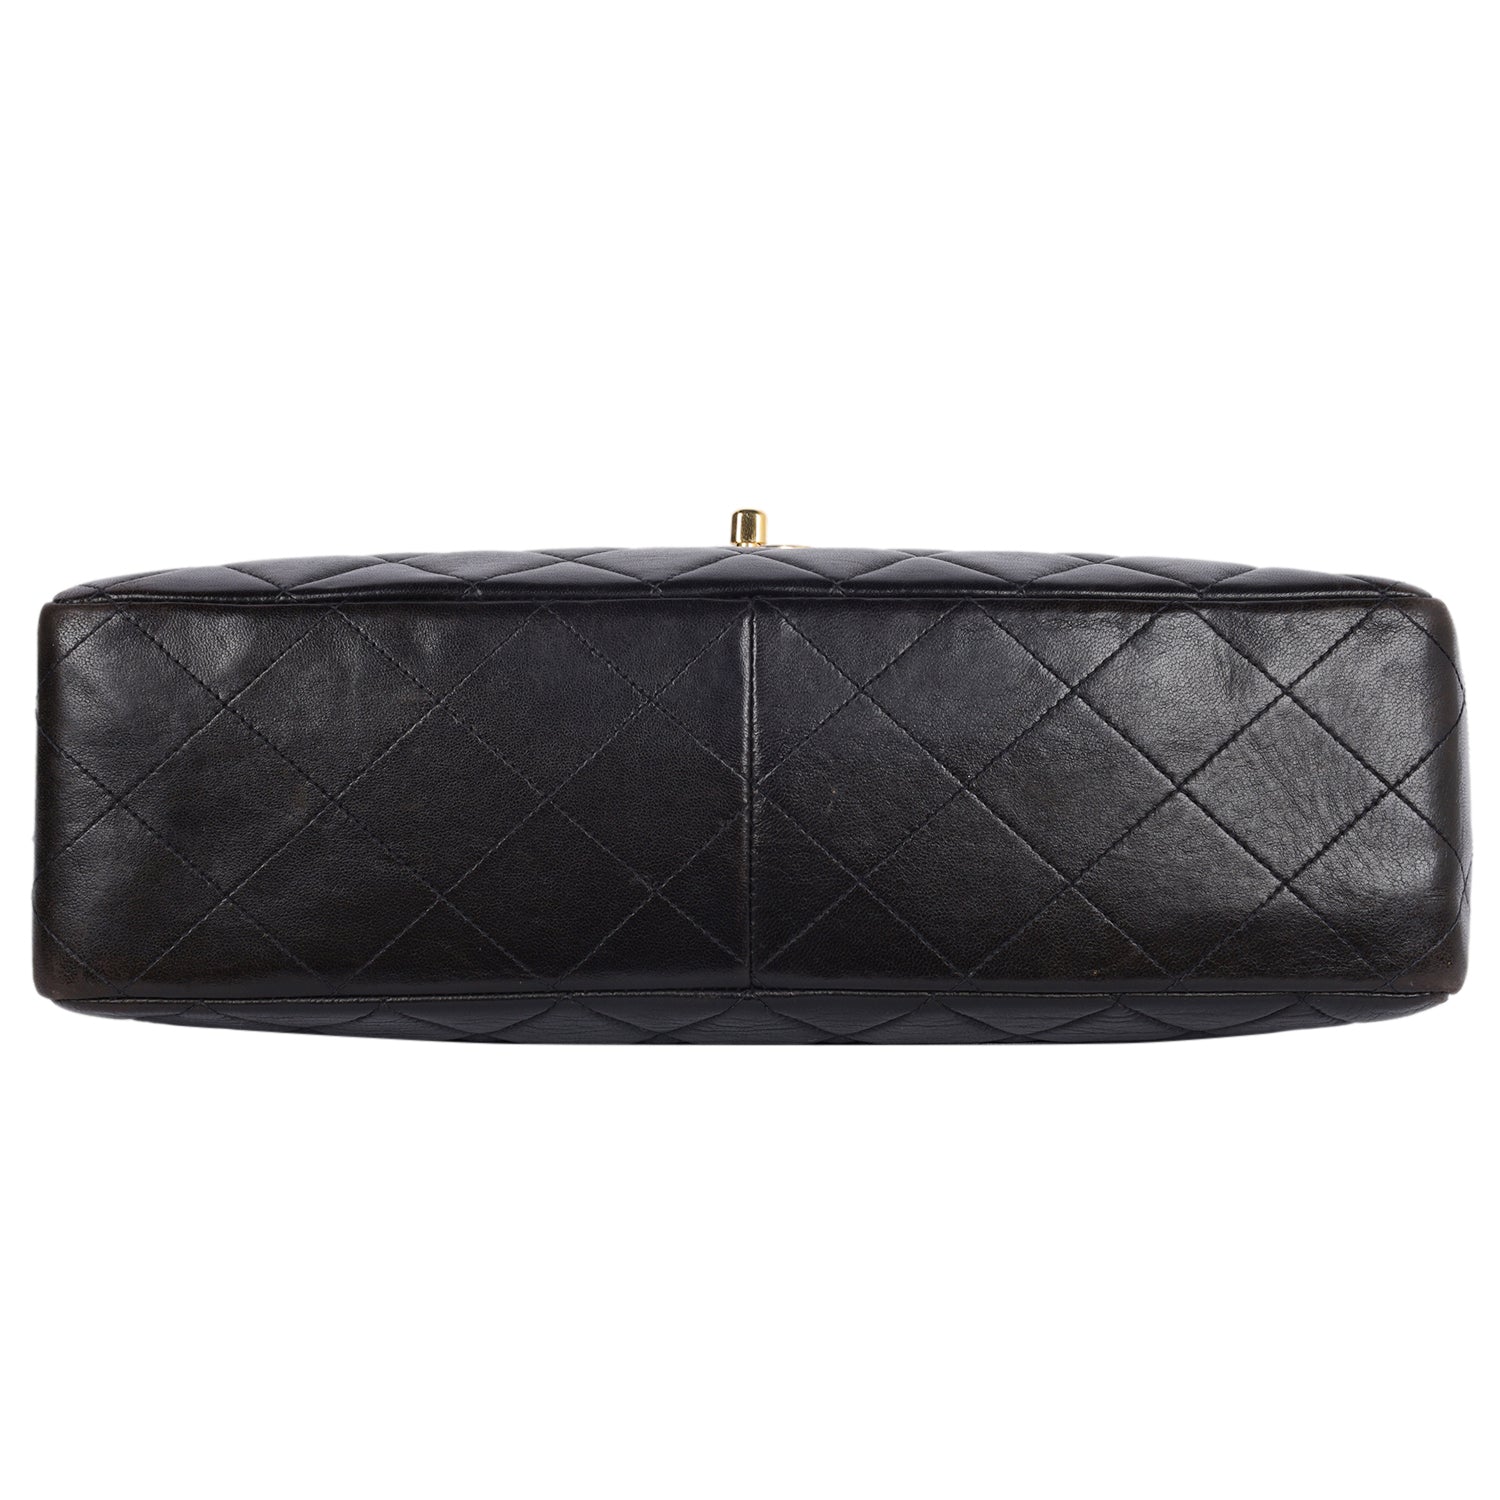 Pre-owned Chanel Black Quilted Calfskin Casino Double Flap Bag